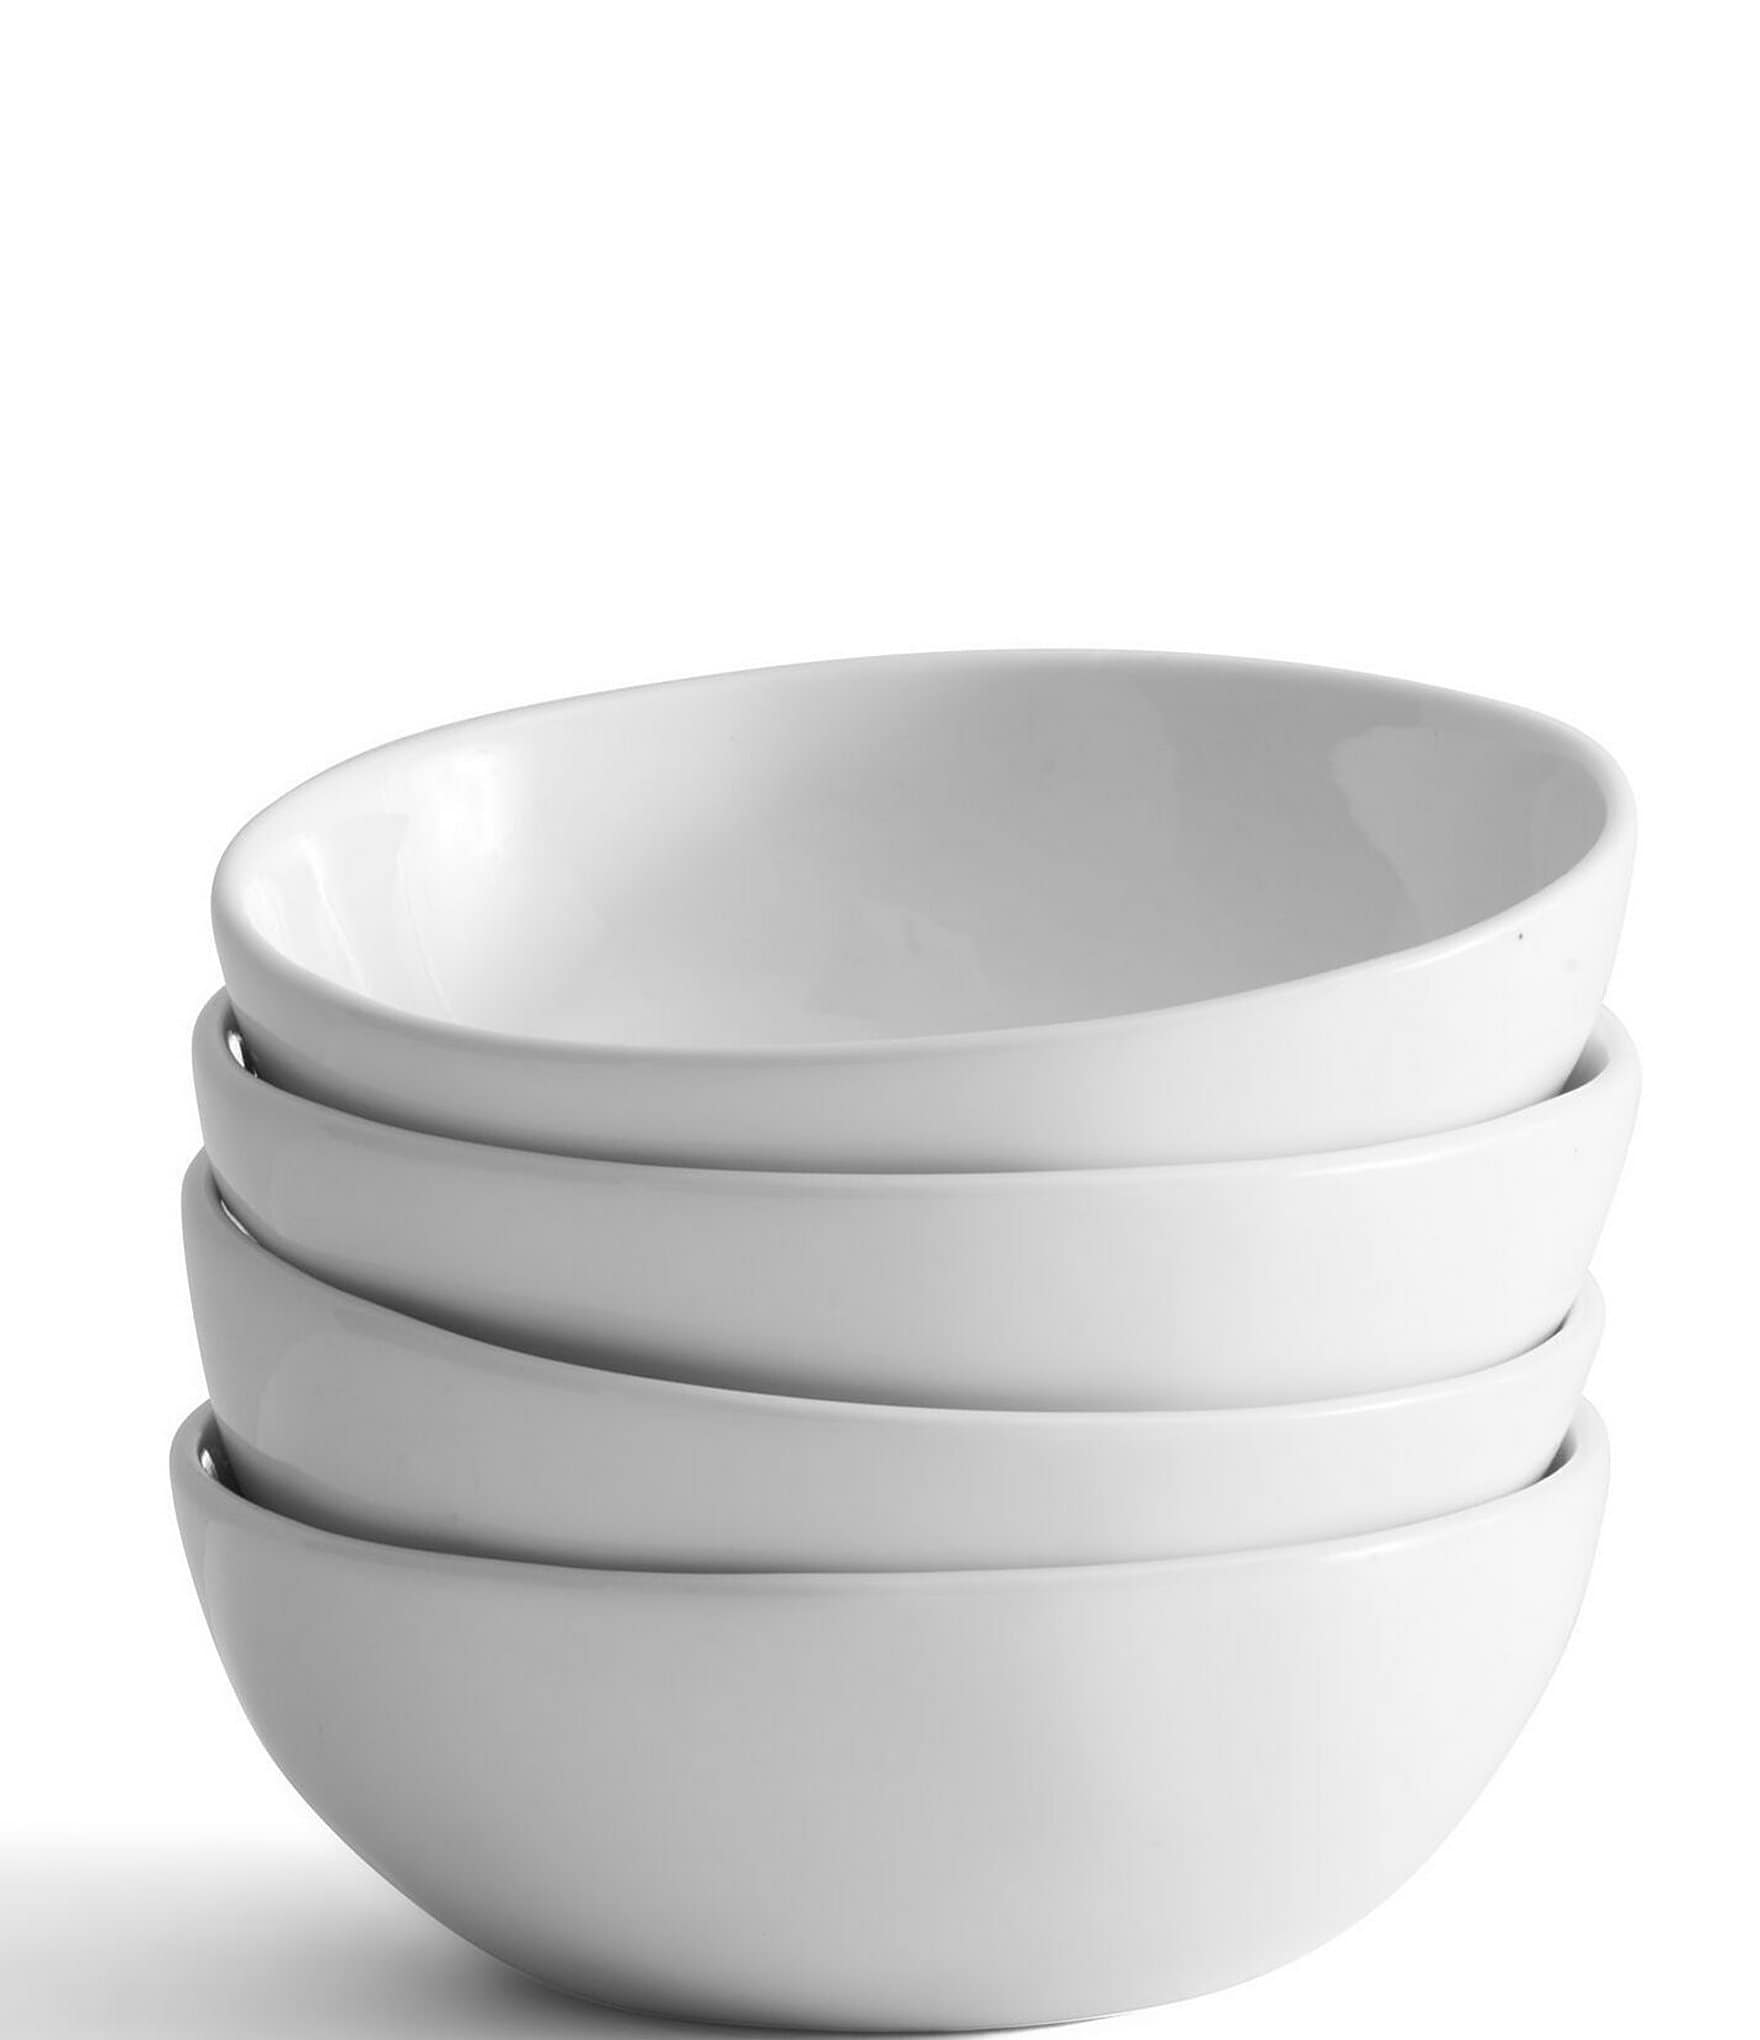 https://dimg.dillards.com/is/image/DillardsZoom/zoom/fitz-and-floyd-everyday-white-organic-soup-cereal-bowls-set-of-4/00000000_zi_4c8017a3-2dc6-4369-8e0f-5a4bf14173e6.jpg